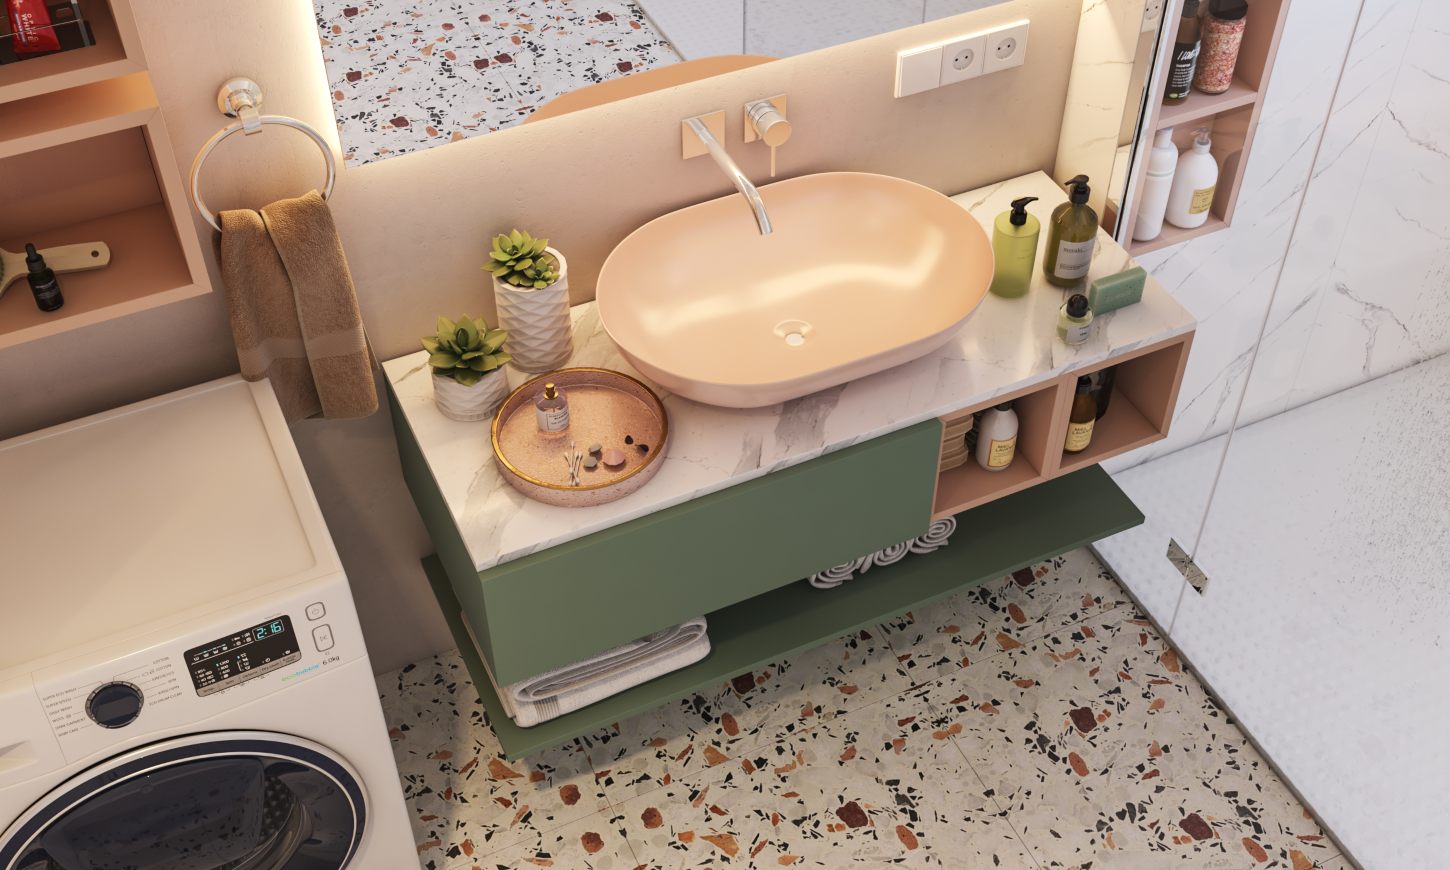 Bathroom design in a simple and elegant style with a floating vanity and a bowl sink